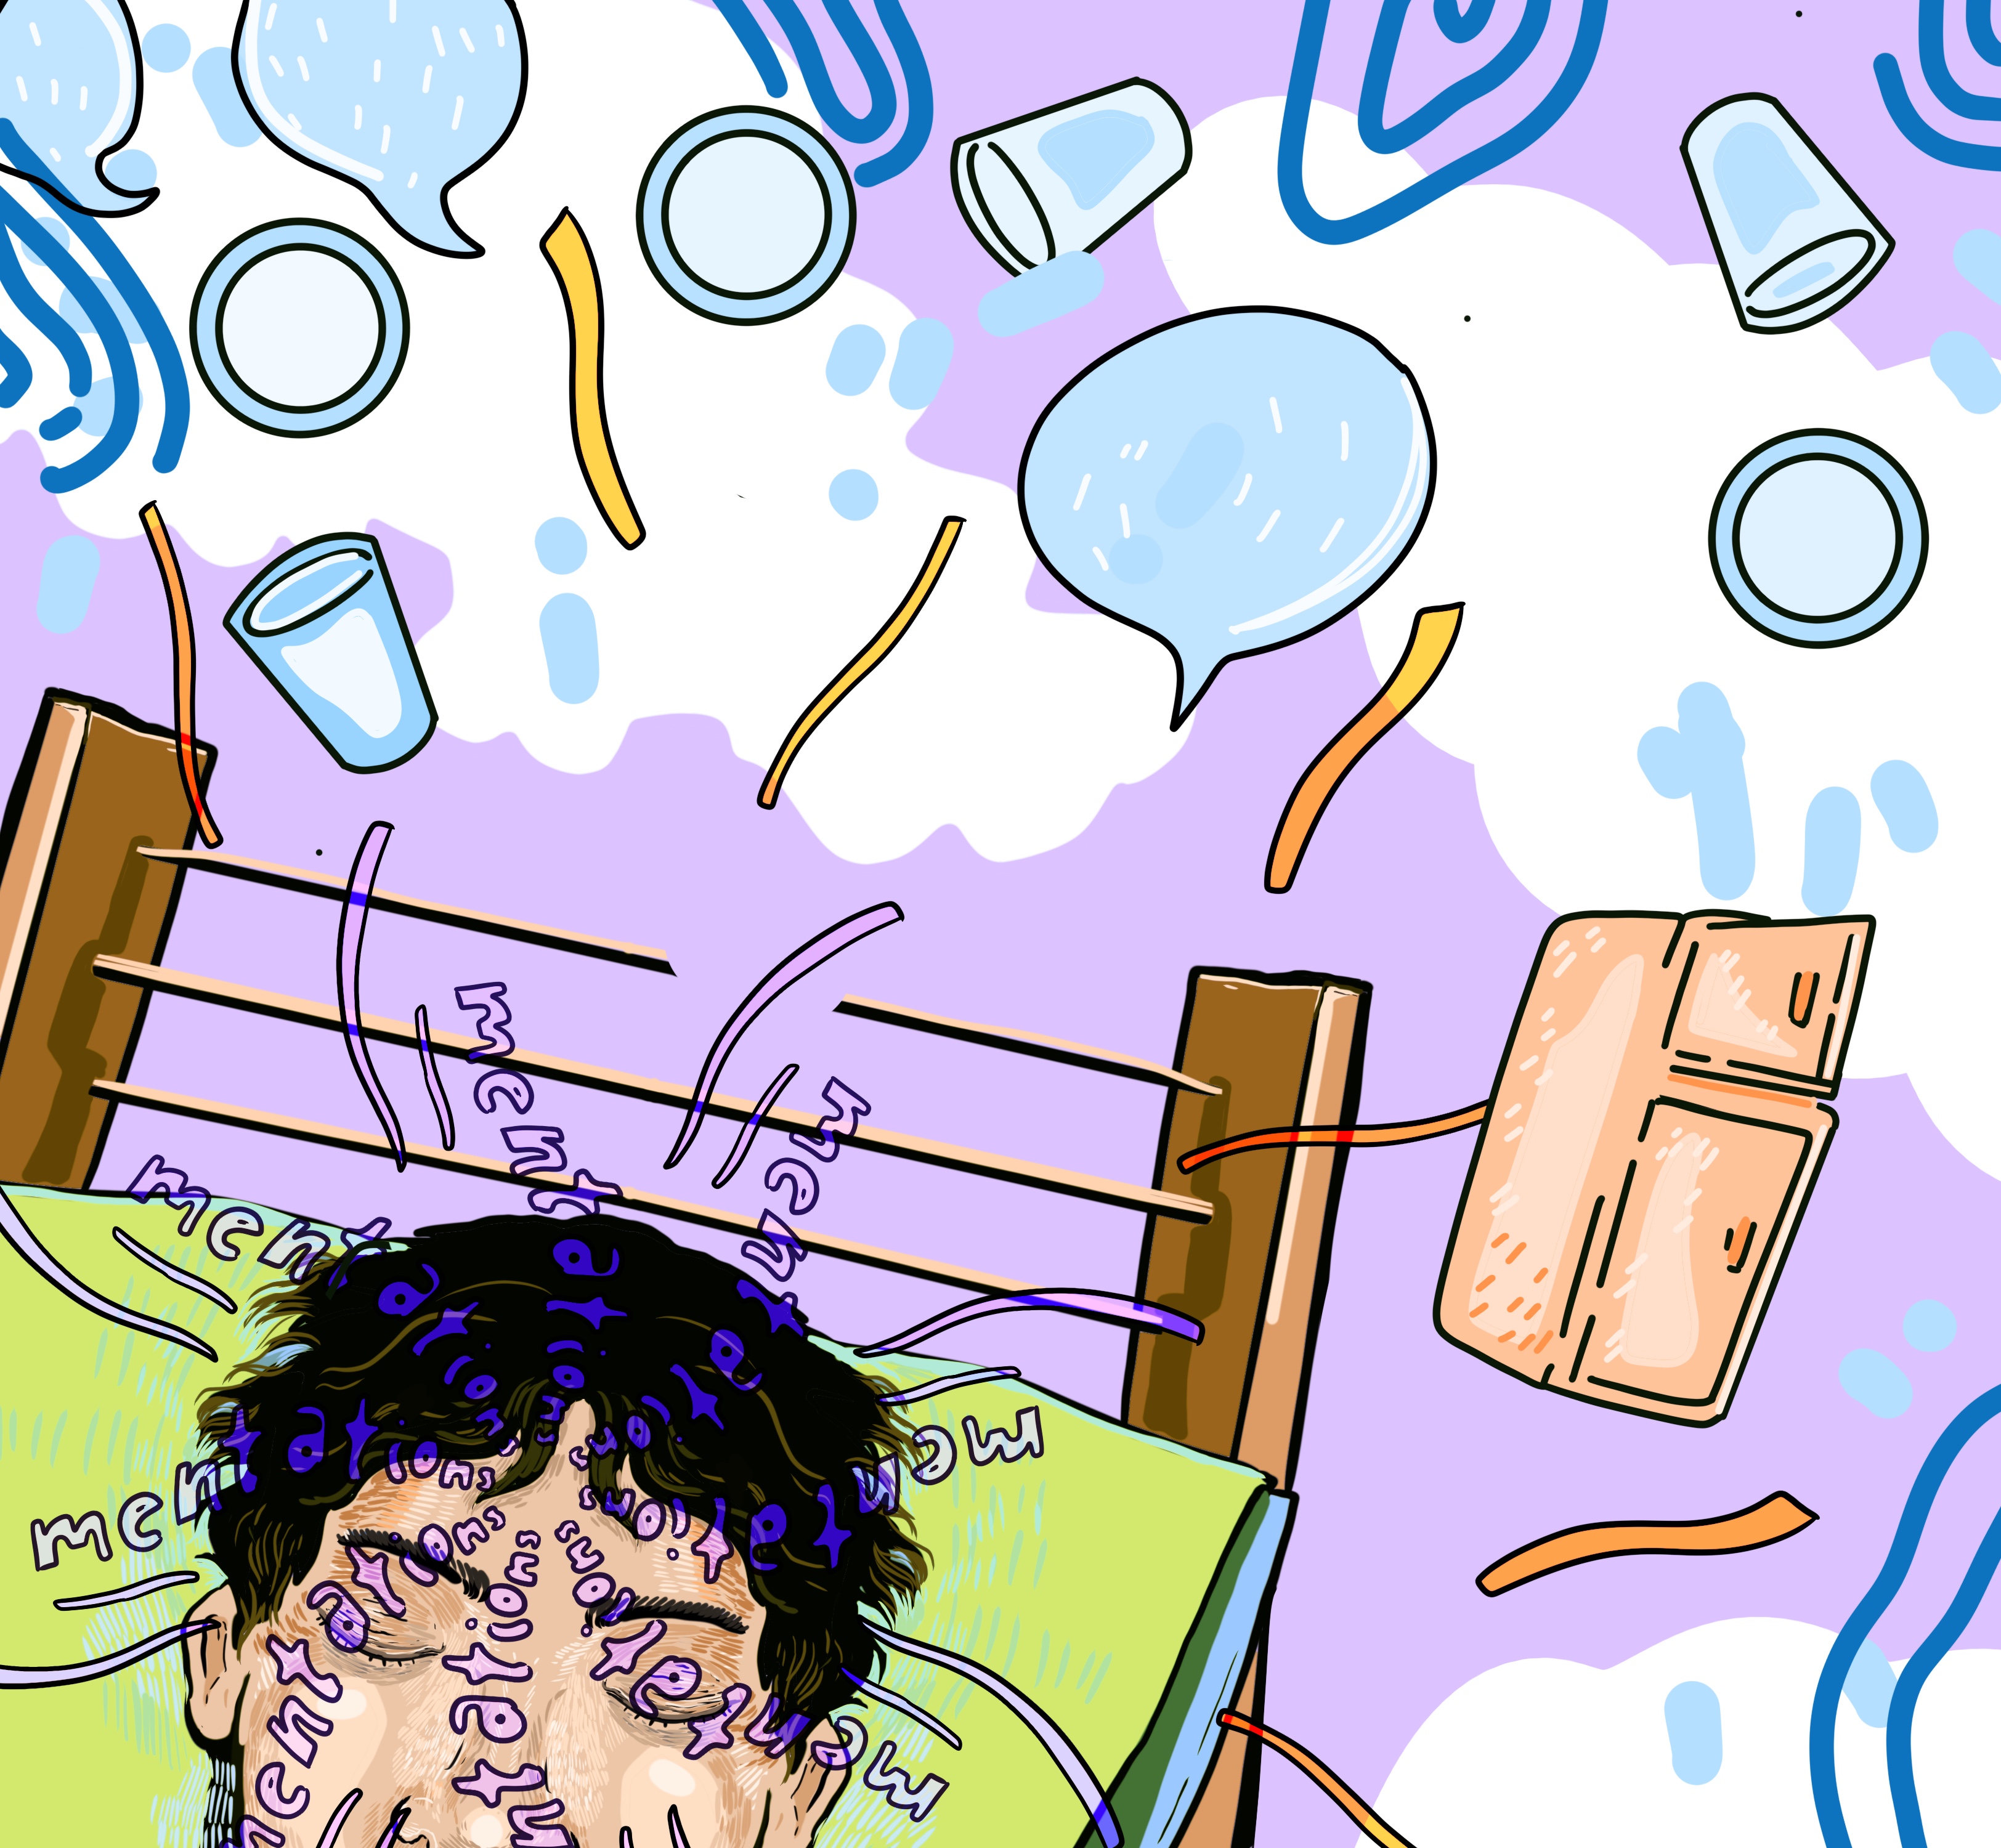 Mentations are active cognitive processes. Person is bed surrounded by things that are related to mentations such as a fridge, cups, speech bubbles, etc.[Graphic by Sara Mizannojehdehi]